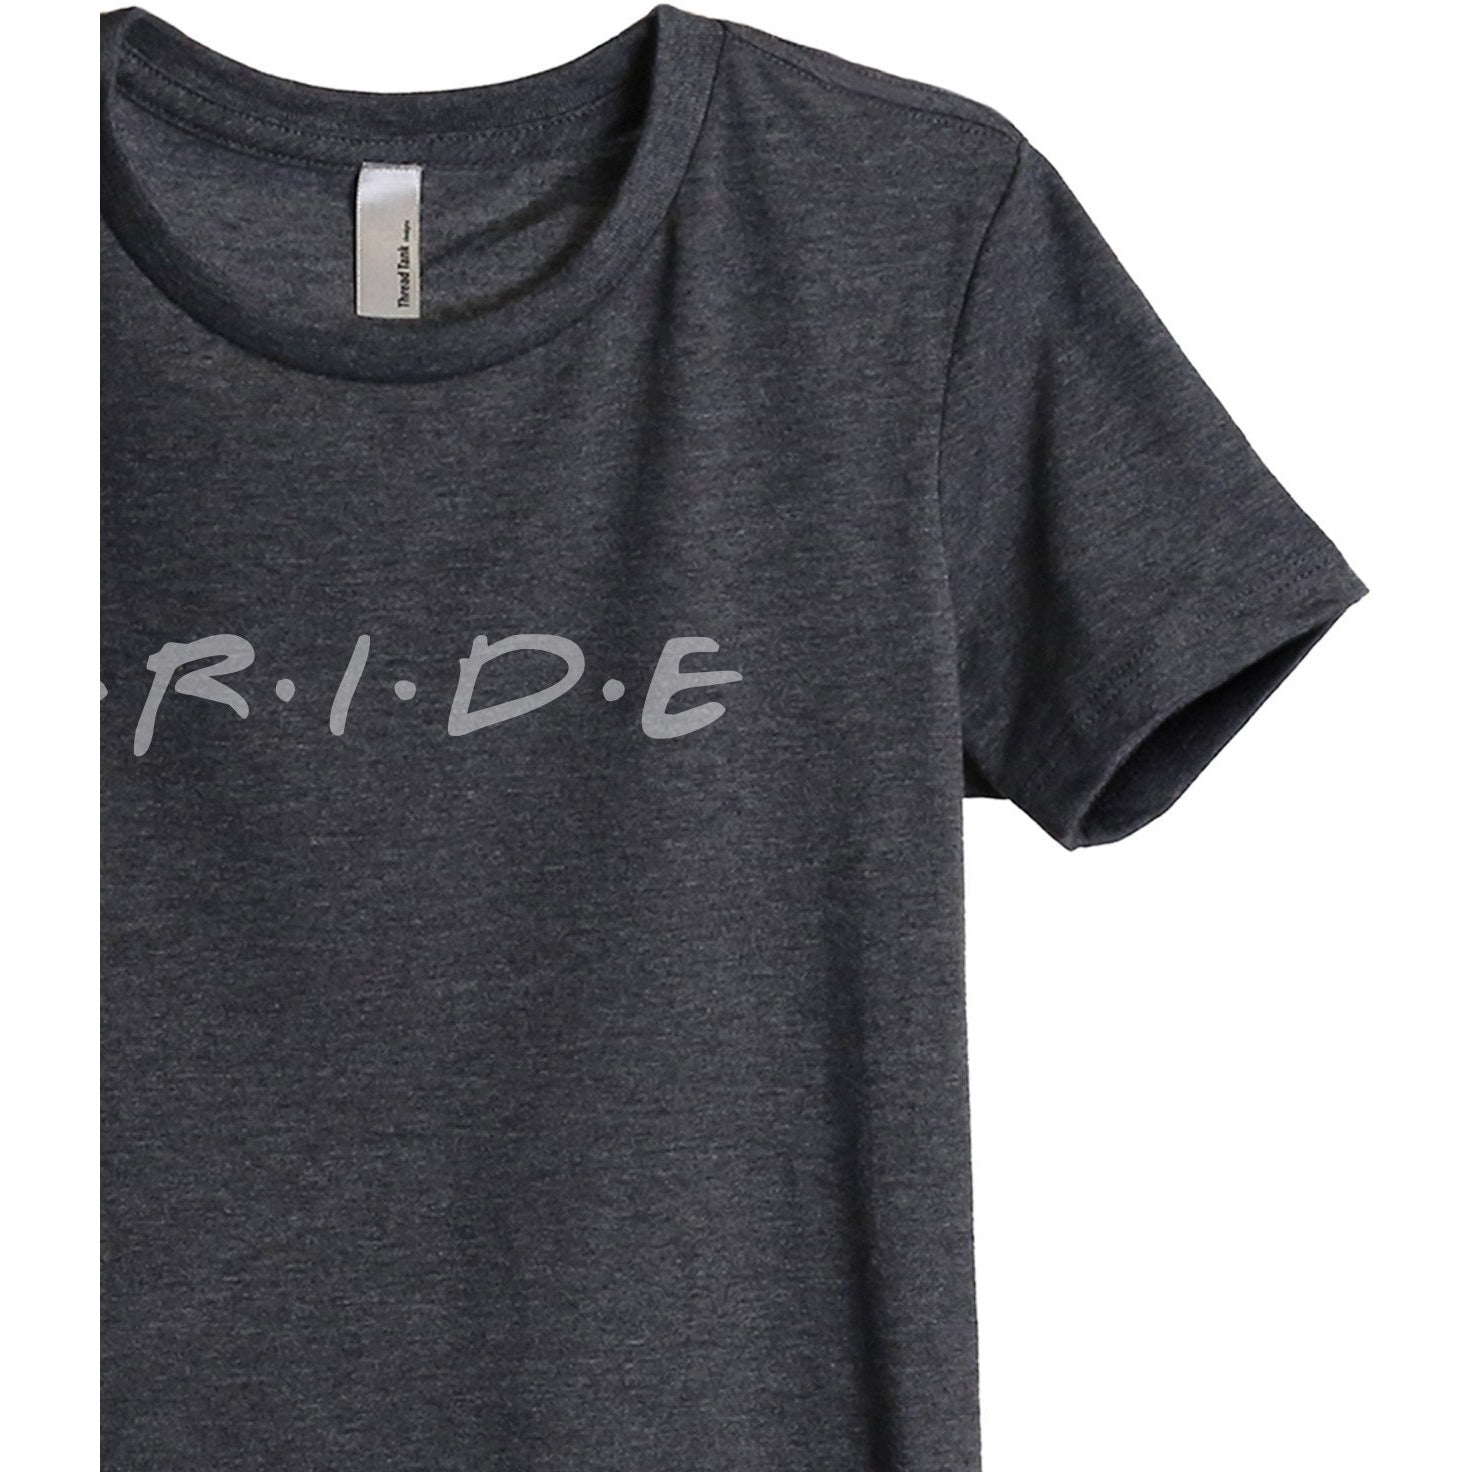 Bride Friends Women's Relaxed Crewneck T-Shirt Top Tee Charcoal Grey Zoom Details